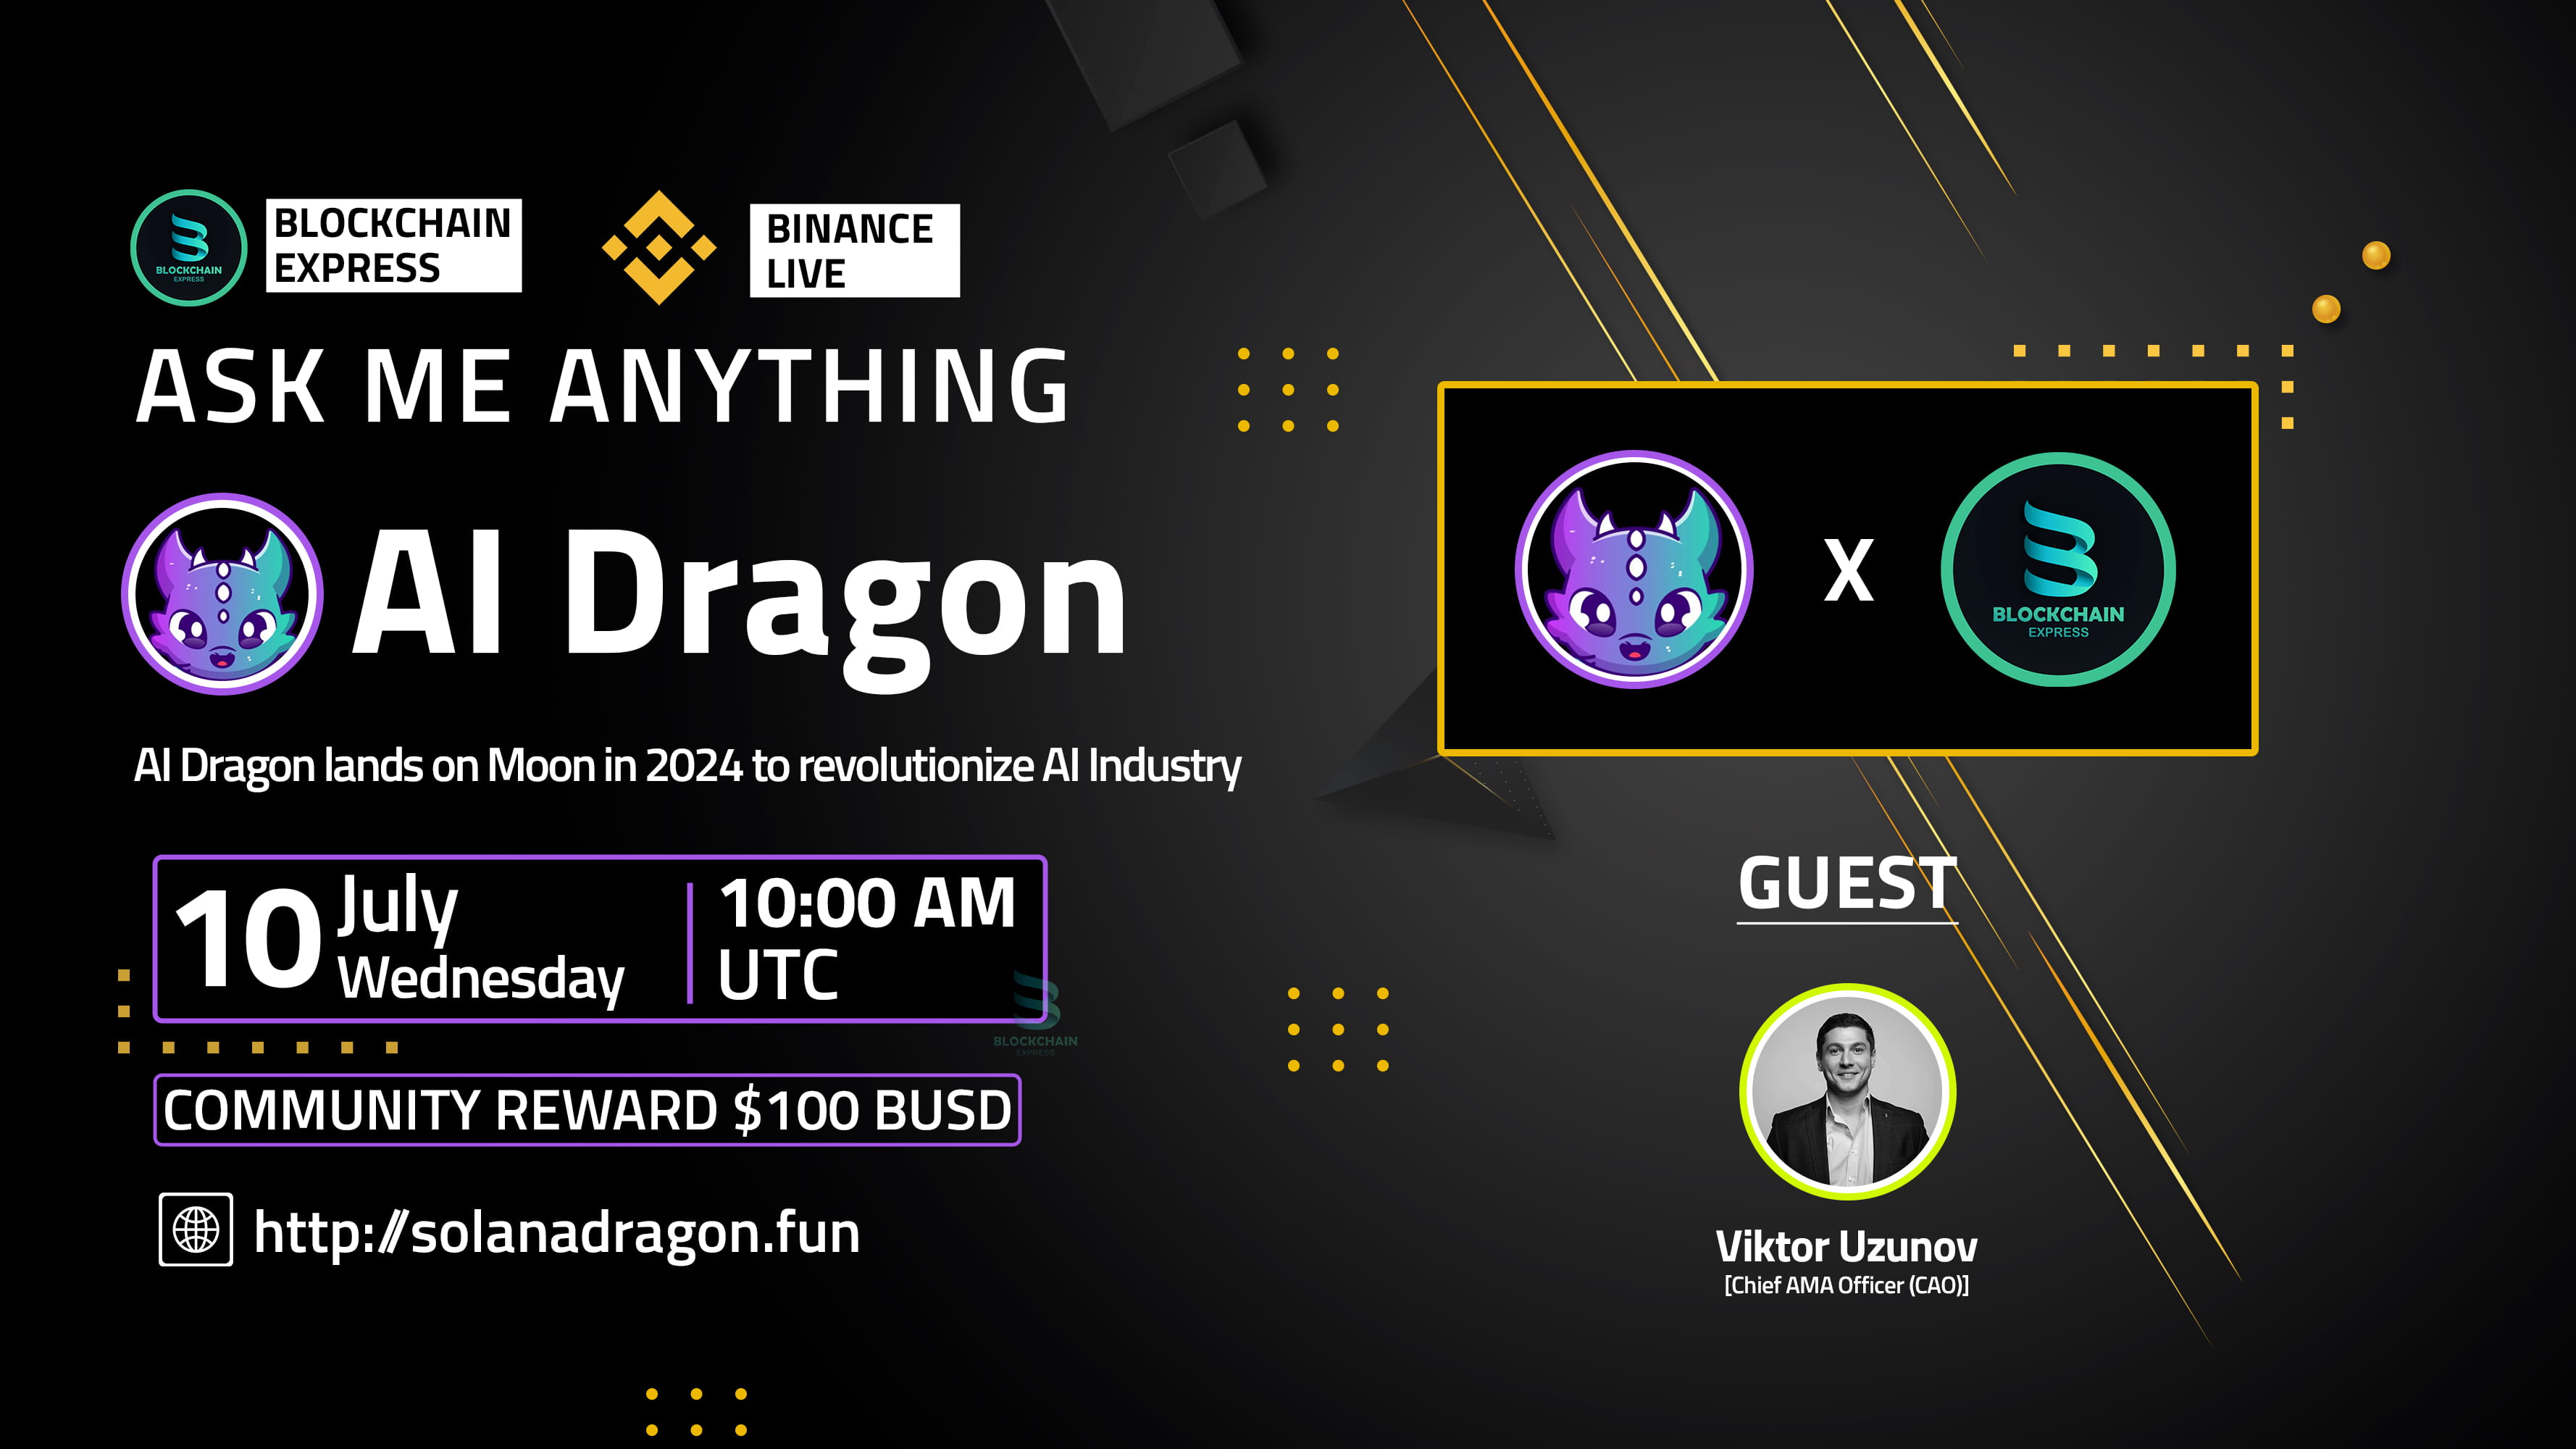 ₿lockchain Express will be hosting an AMA session with" AI Dragon "